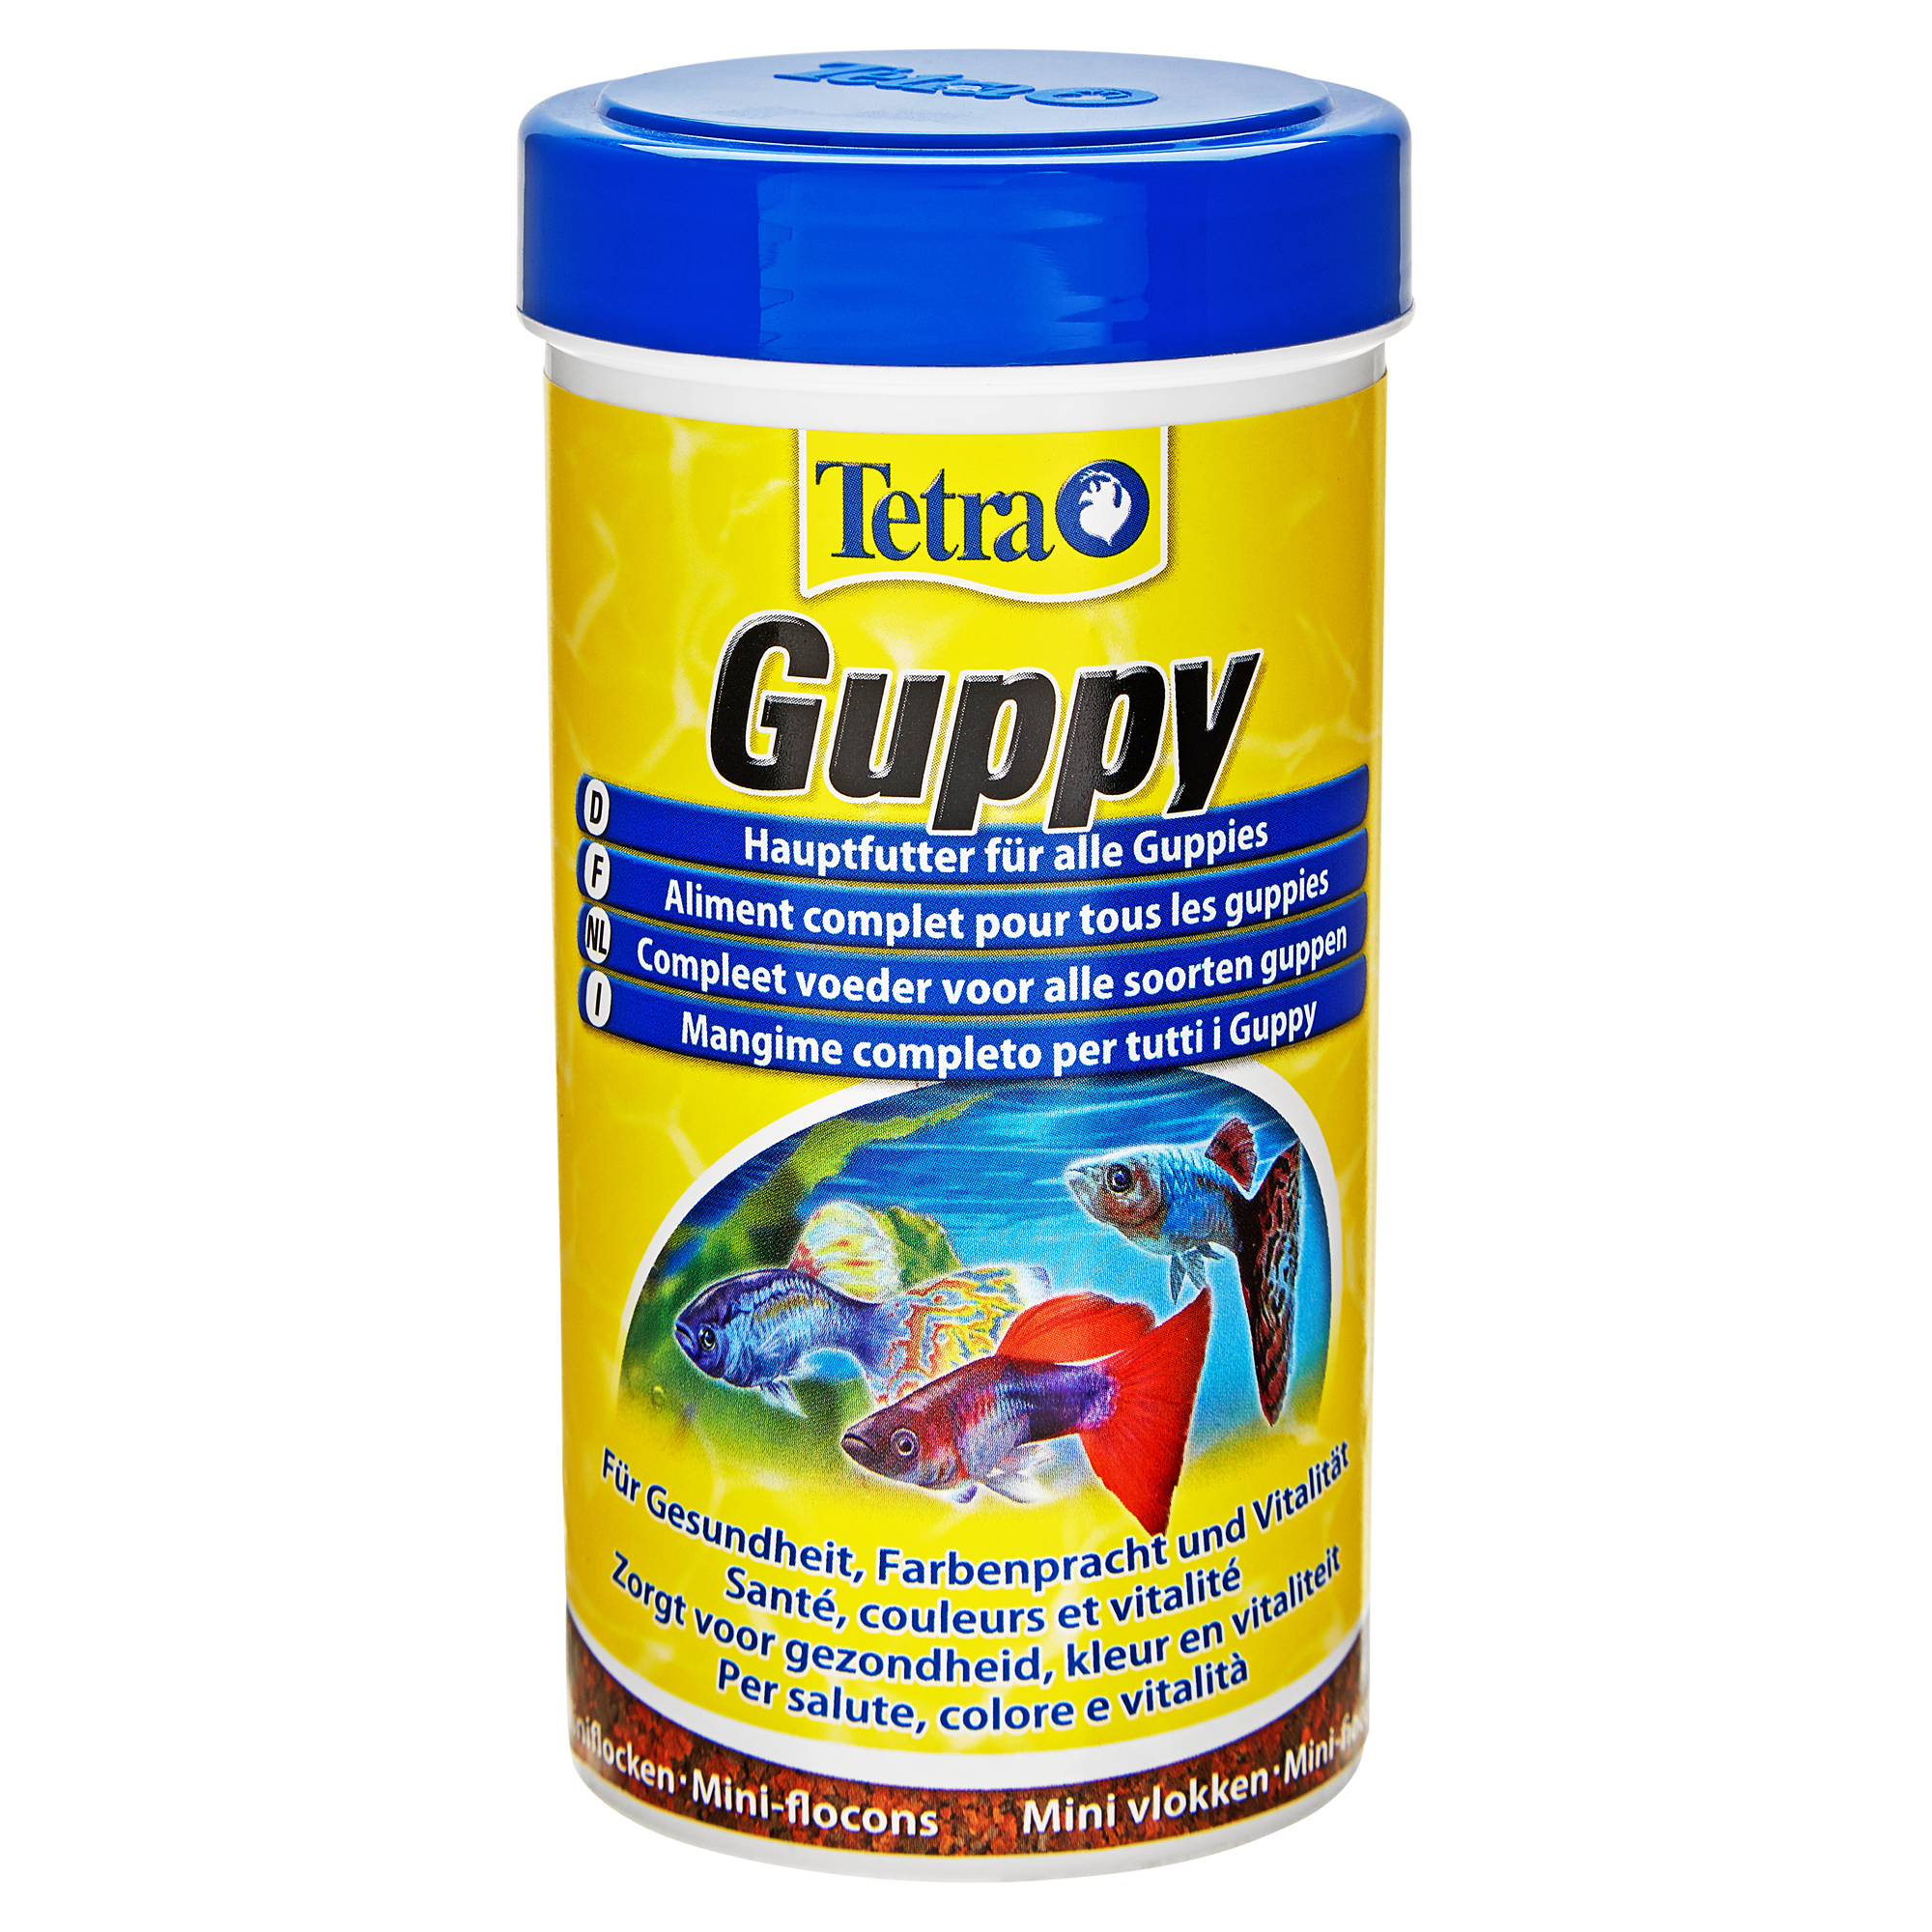 Fischfutter Guppy 75 g + product picture